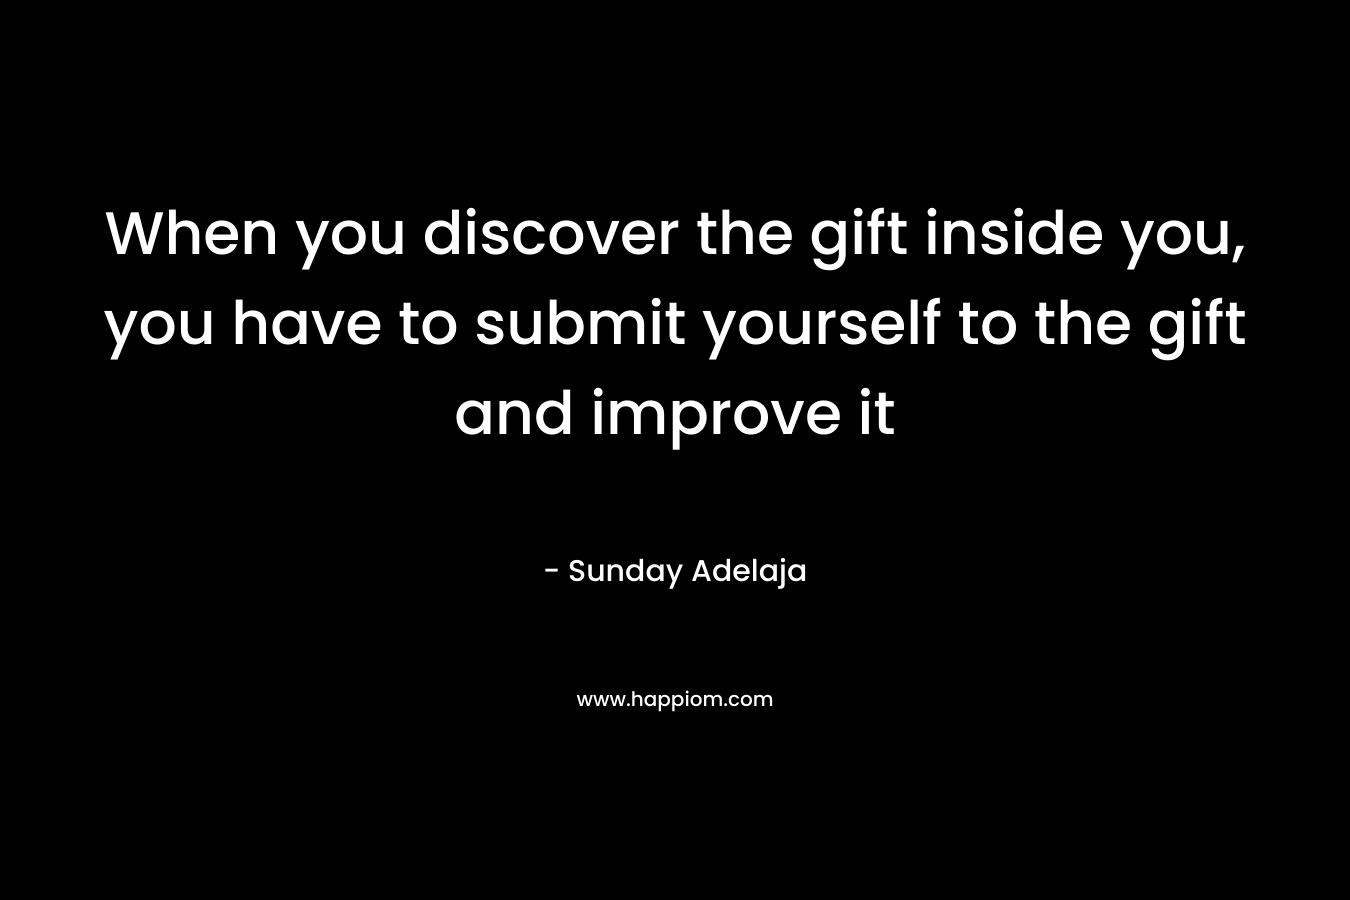 When you discover the gift inside you, you have to submit yourself to the gift and improve it